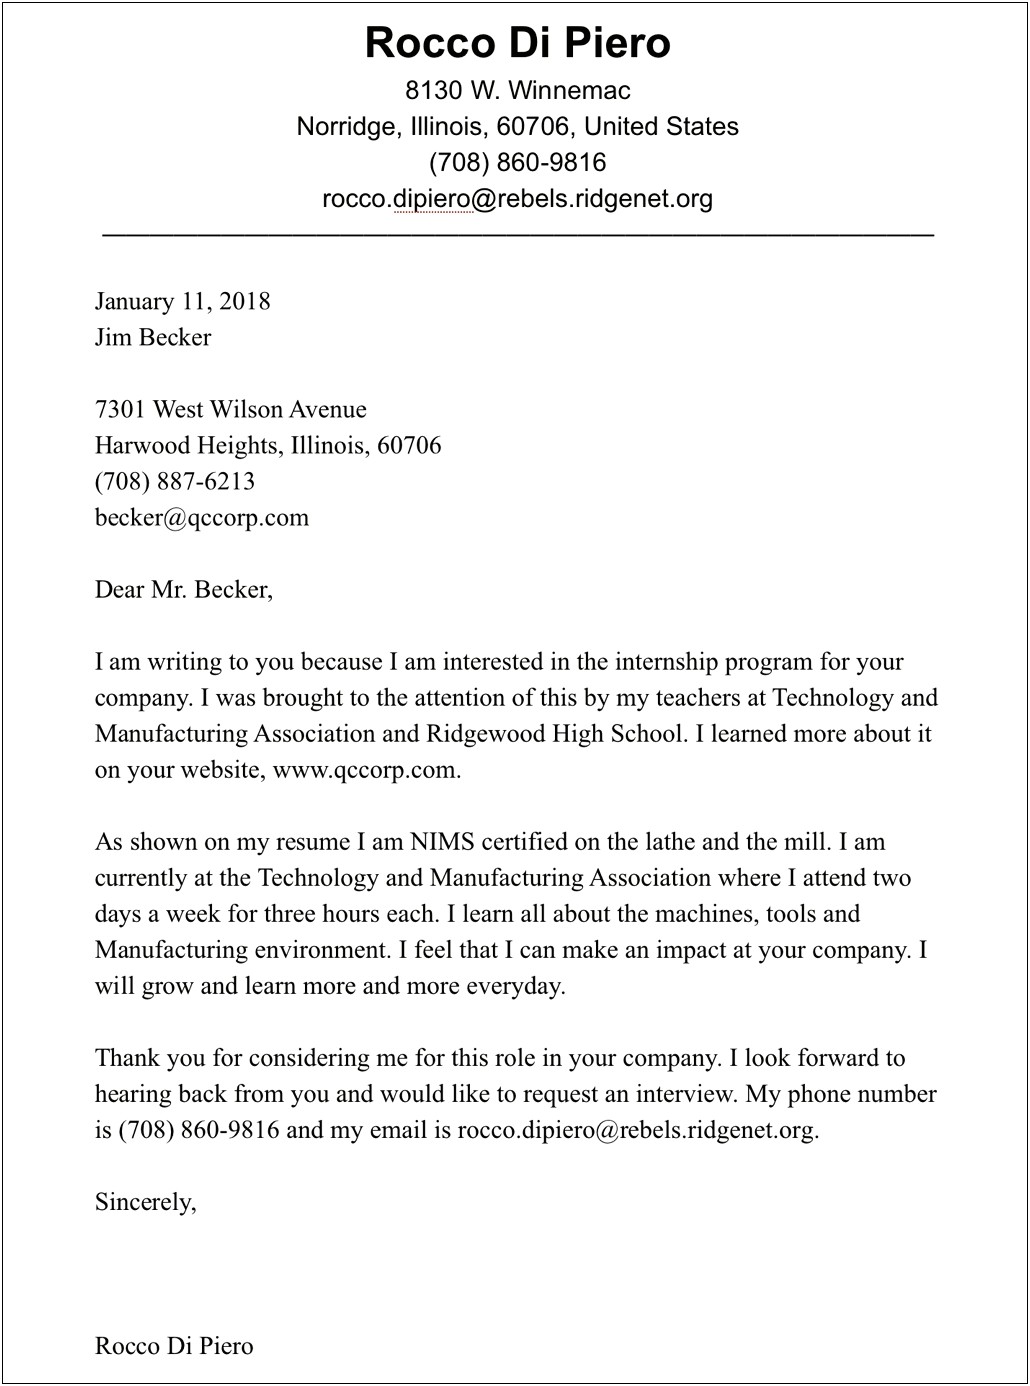 Email Cover Letter For Resume With Reference